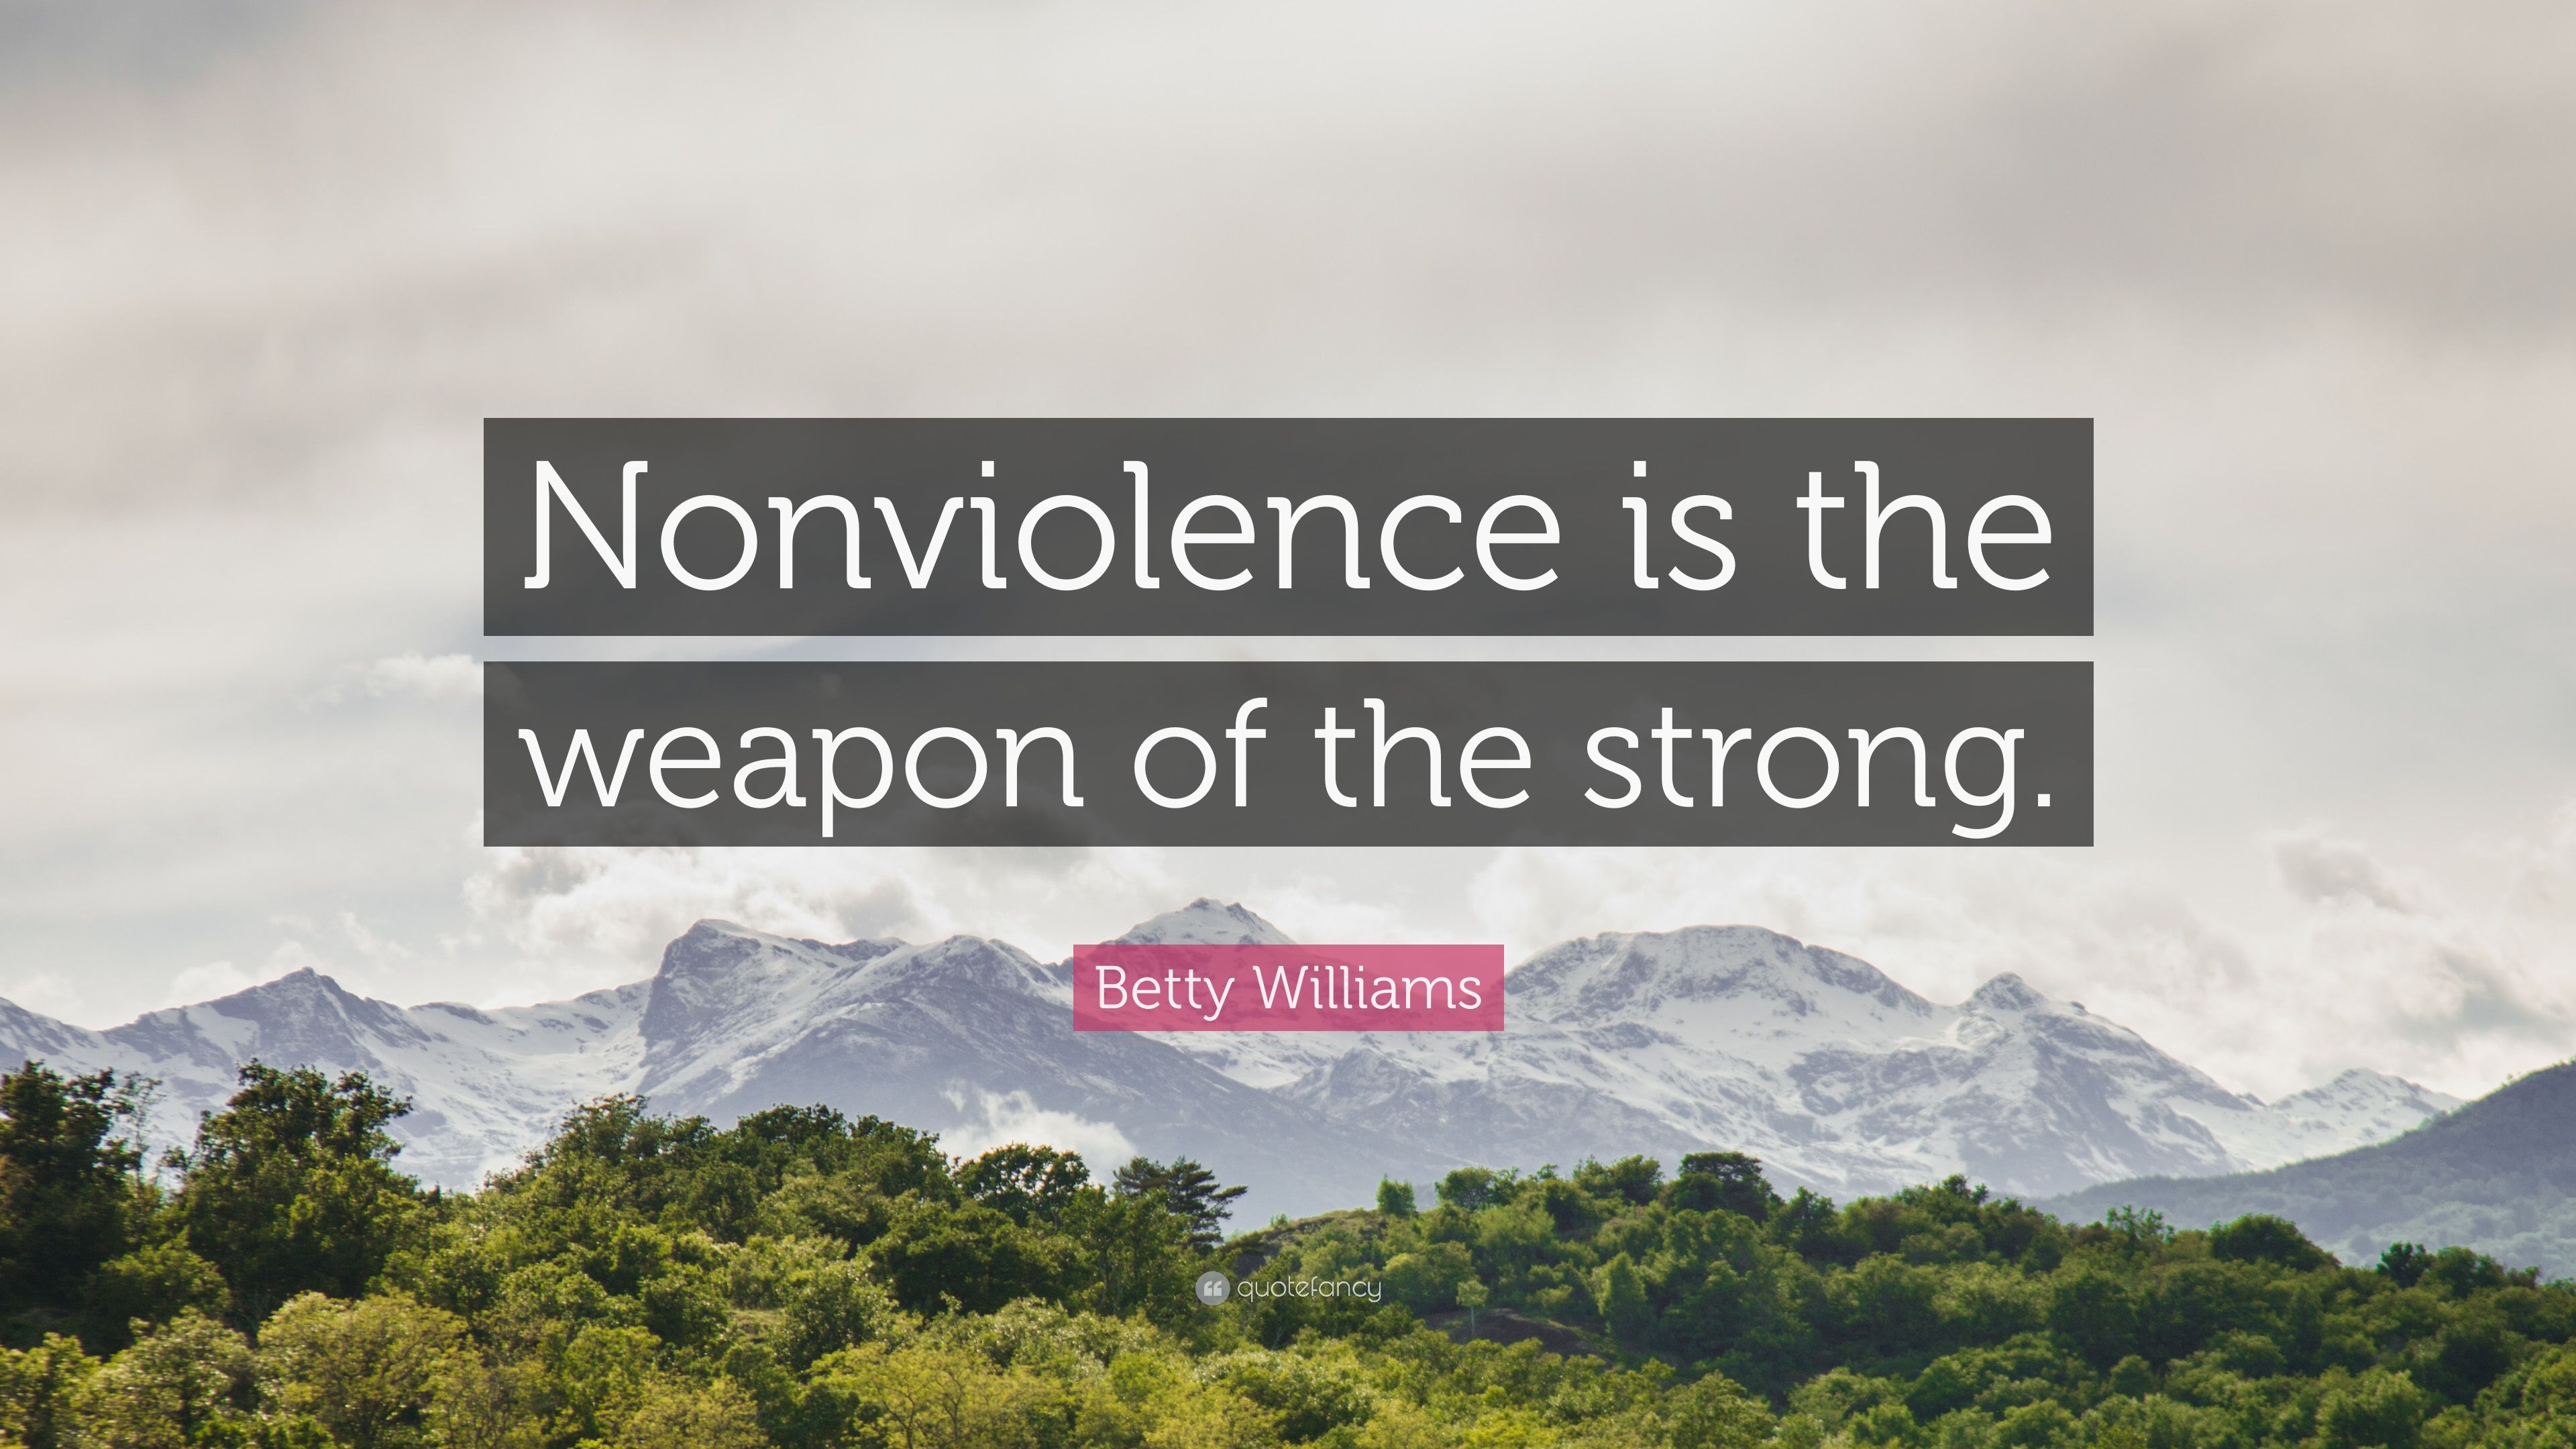 Betty Williams Quote: “Nonviolence is the weapon of the strong.” (7 wallpaper)